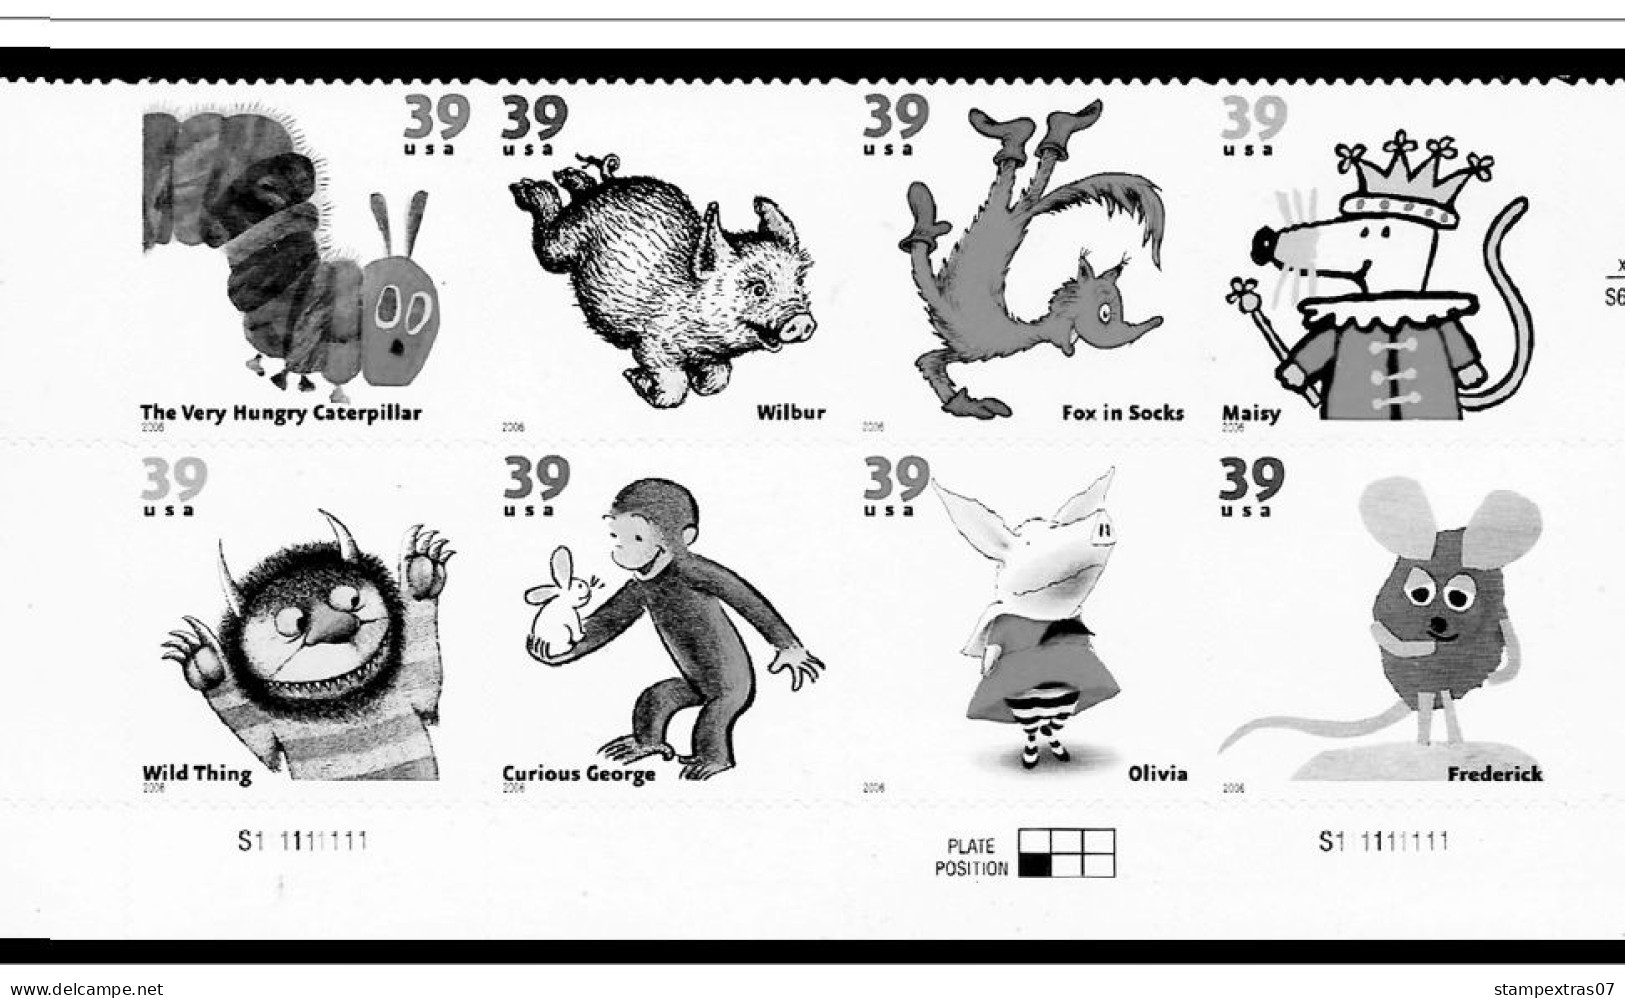 US 2006-2010 PLATE BLOCKS STAMP ALBUM PAGES (51 B&w Illustrated Pages) - Engels